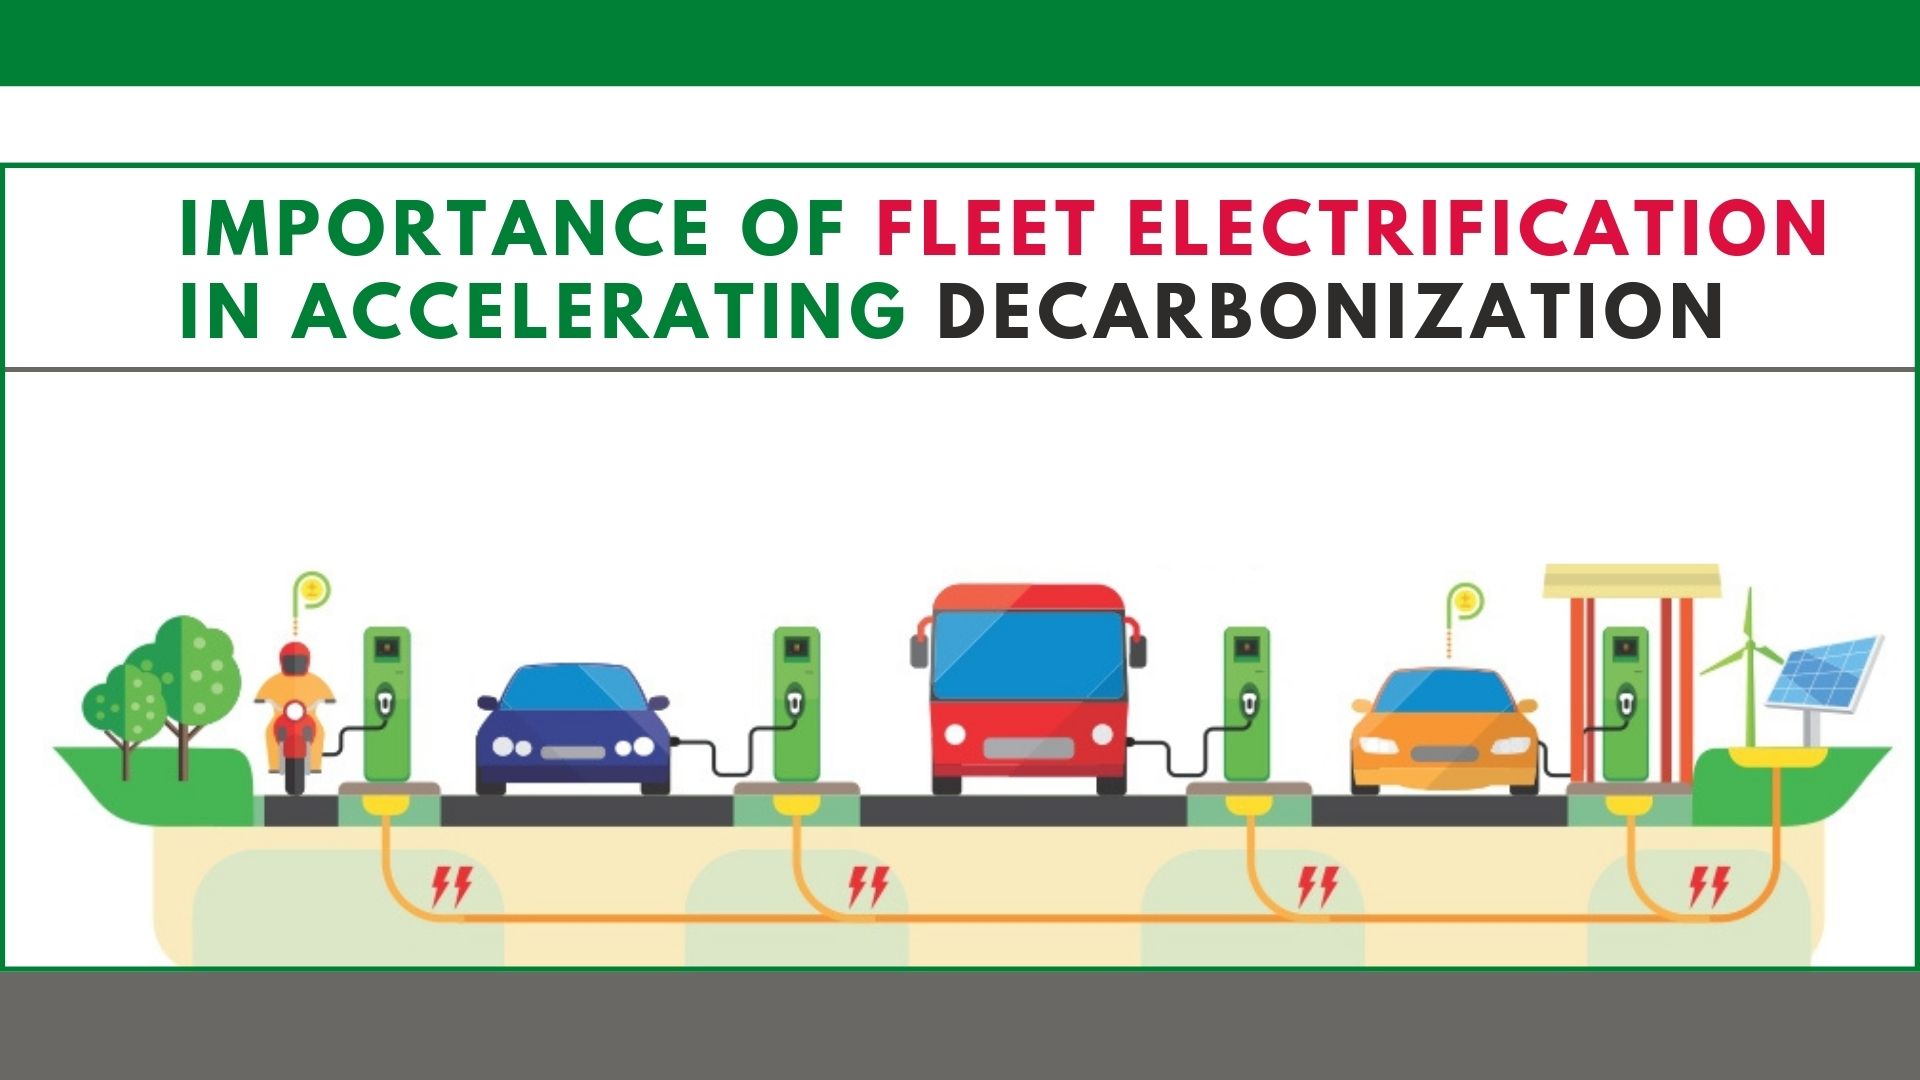 https://e-vehicleinfo.com/importance-of-fleet-electrification-in-accelerating-decarbonization/